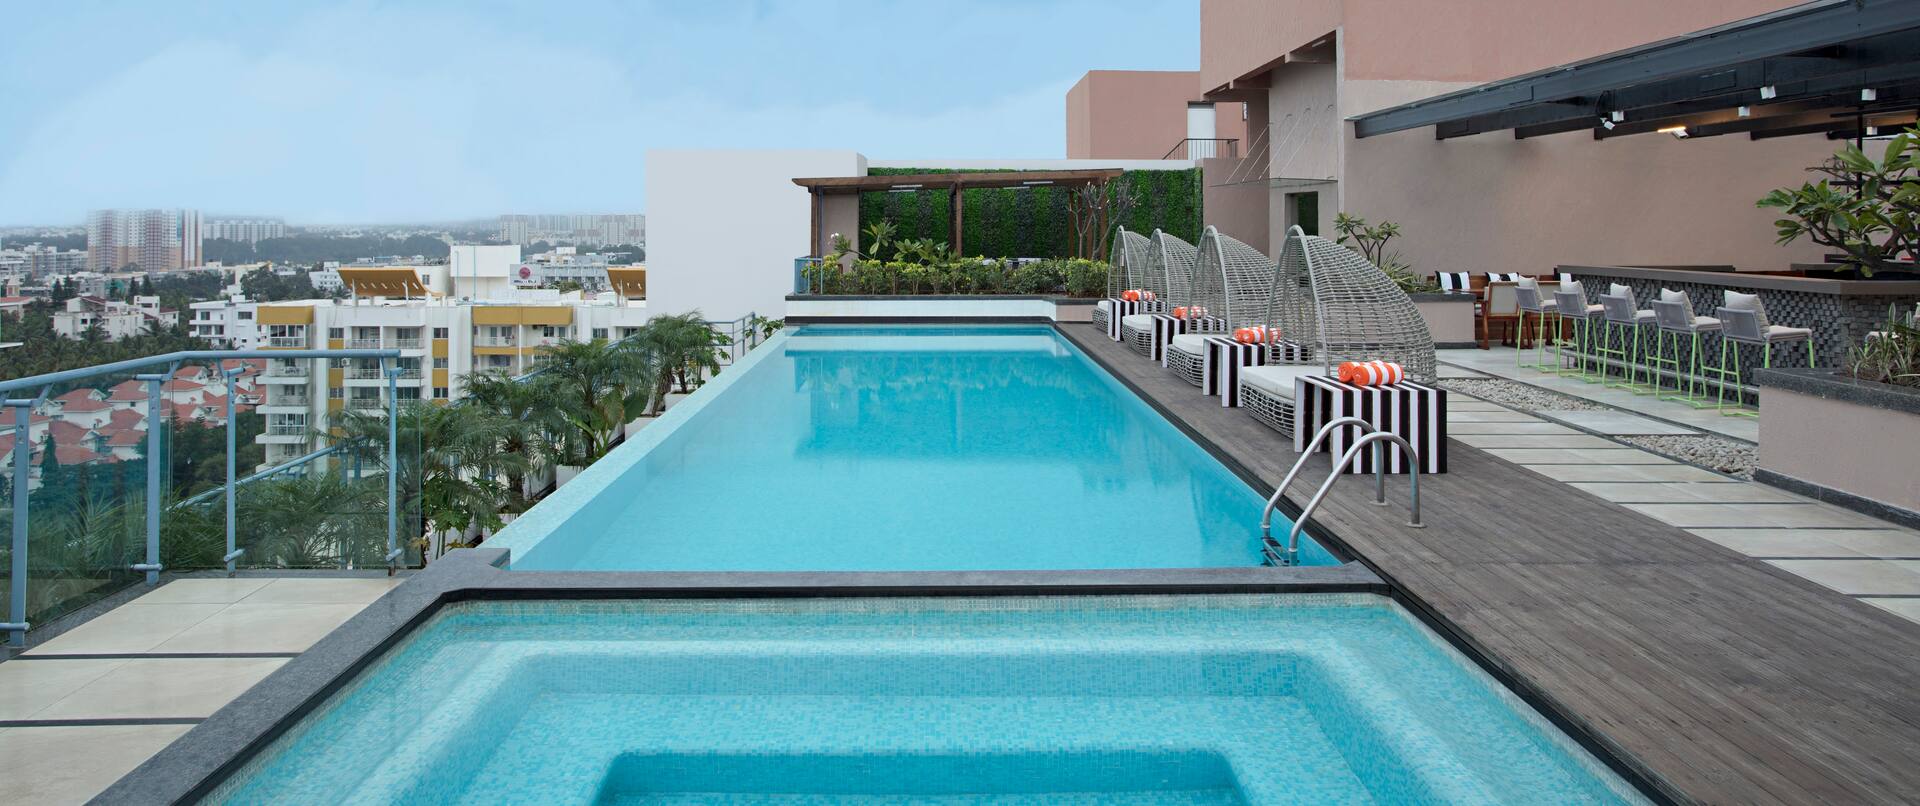 Outdoor pool with handrail